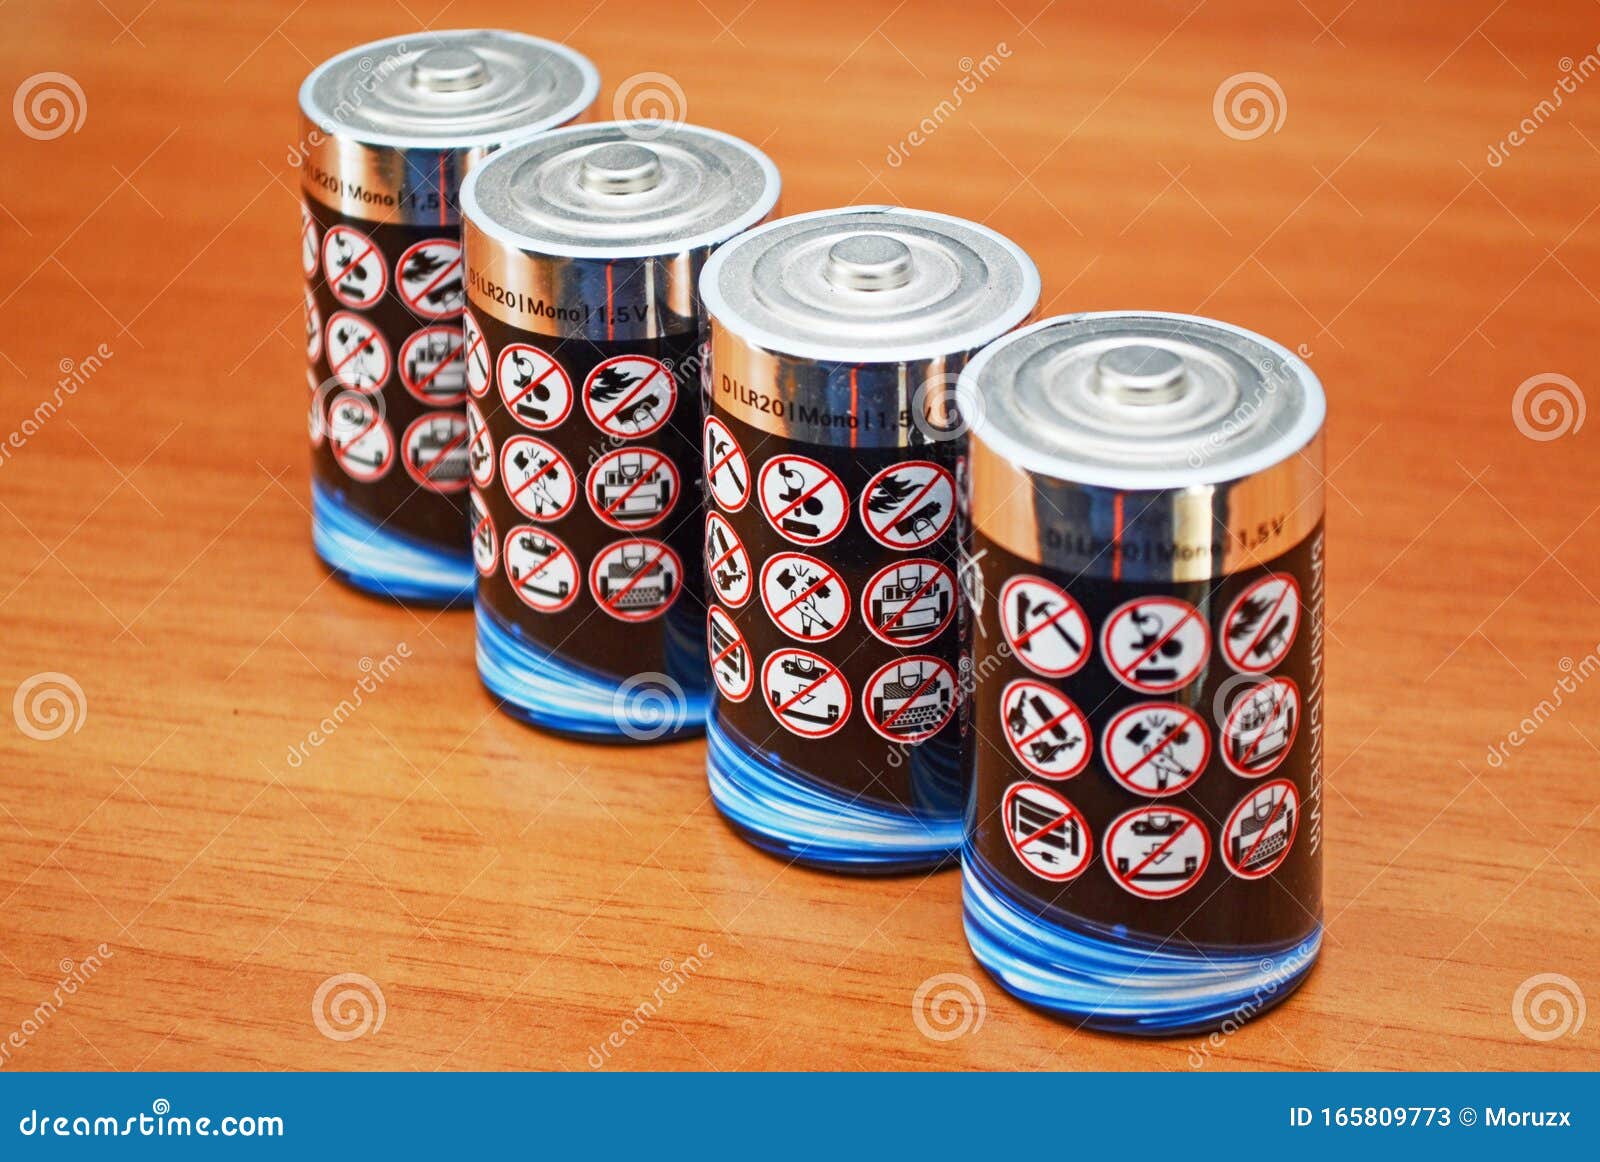 alkaline battery cells with warning message icons on them